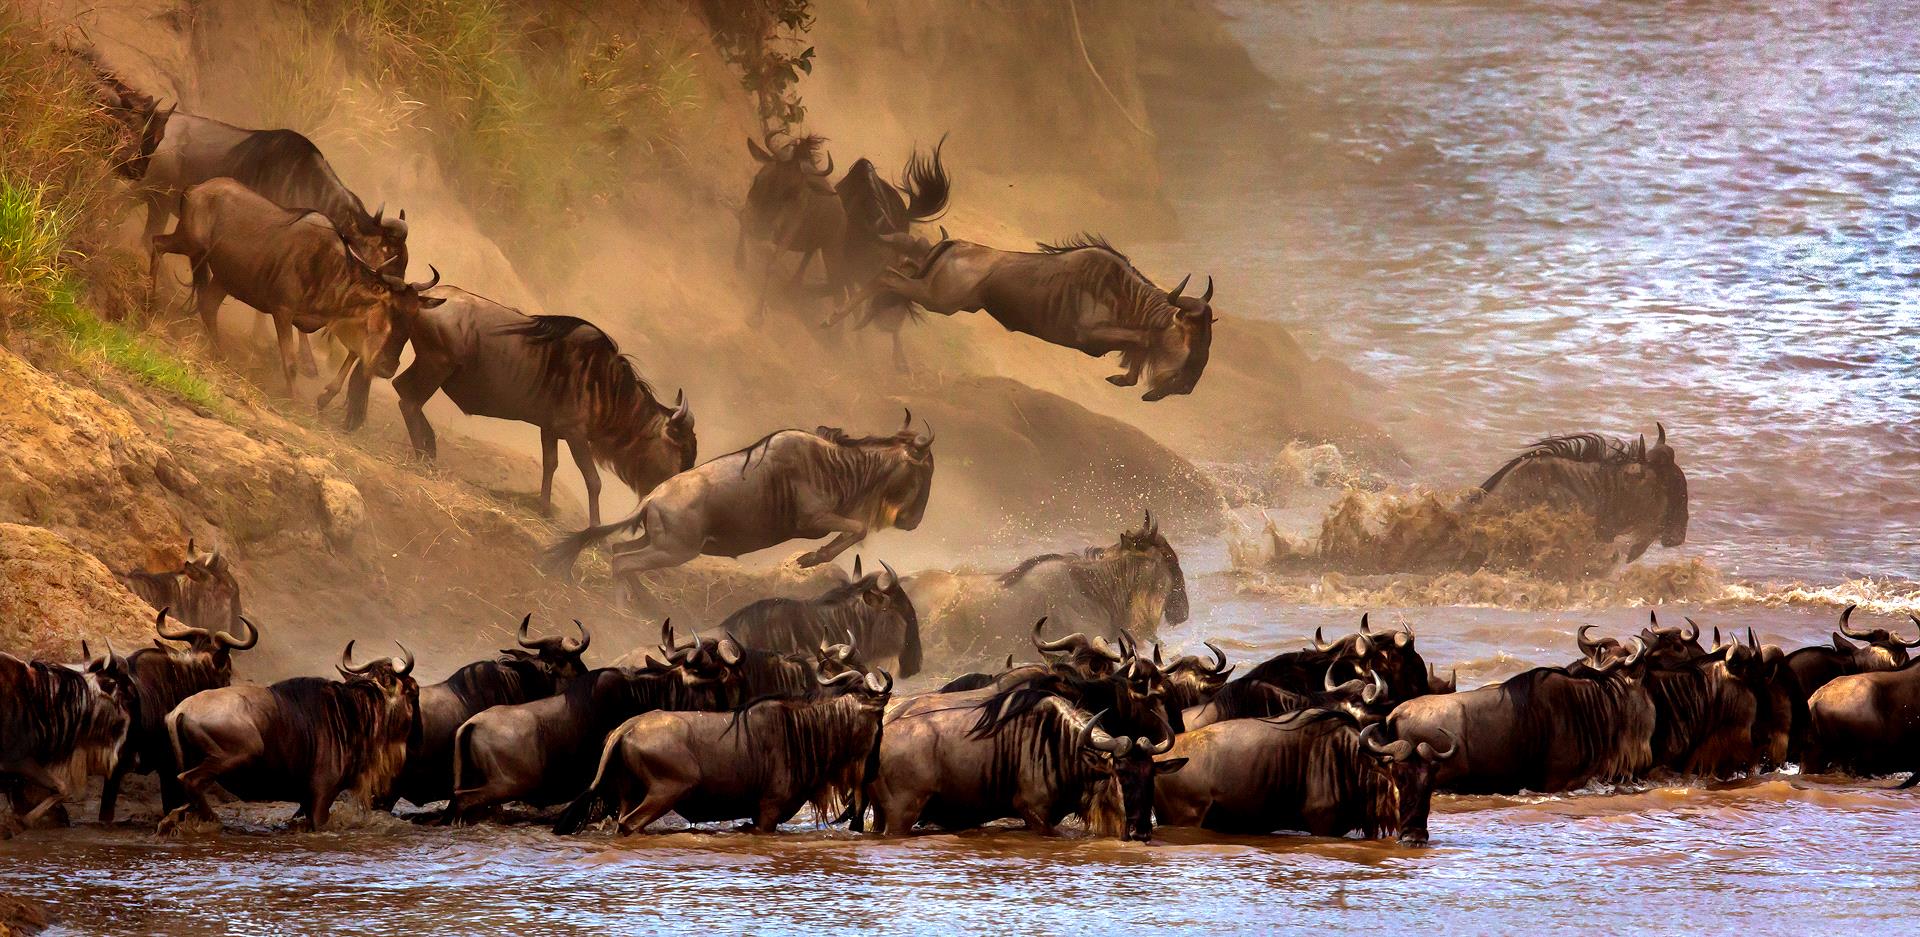 Certificate of Commendation - Sergey Agapov (Russian Federation) - Great Migration Of Wildebeest 2